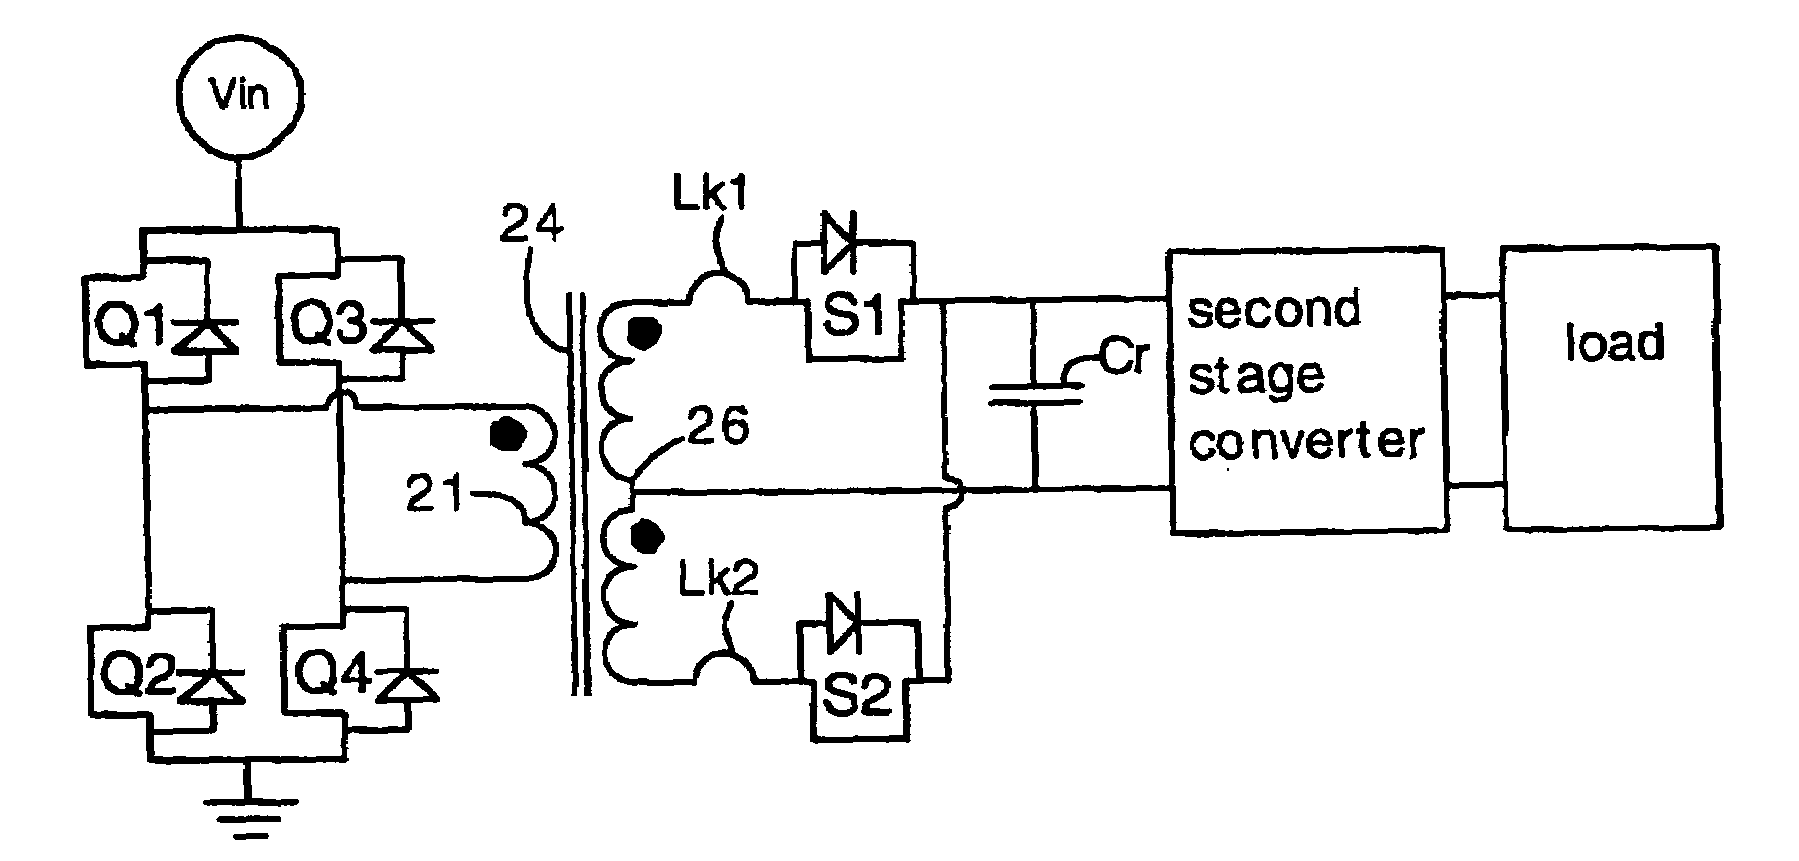 Power converters having capacitor resonant with transformer leakage inductance